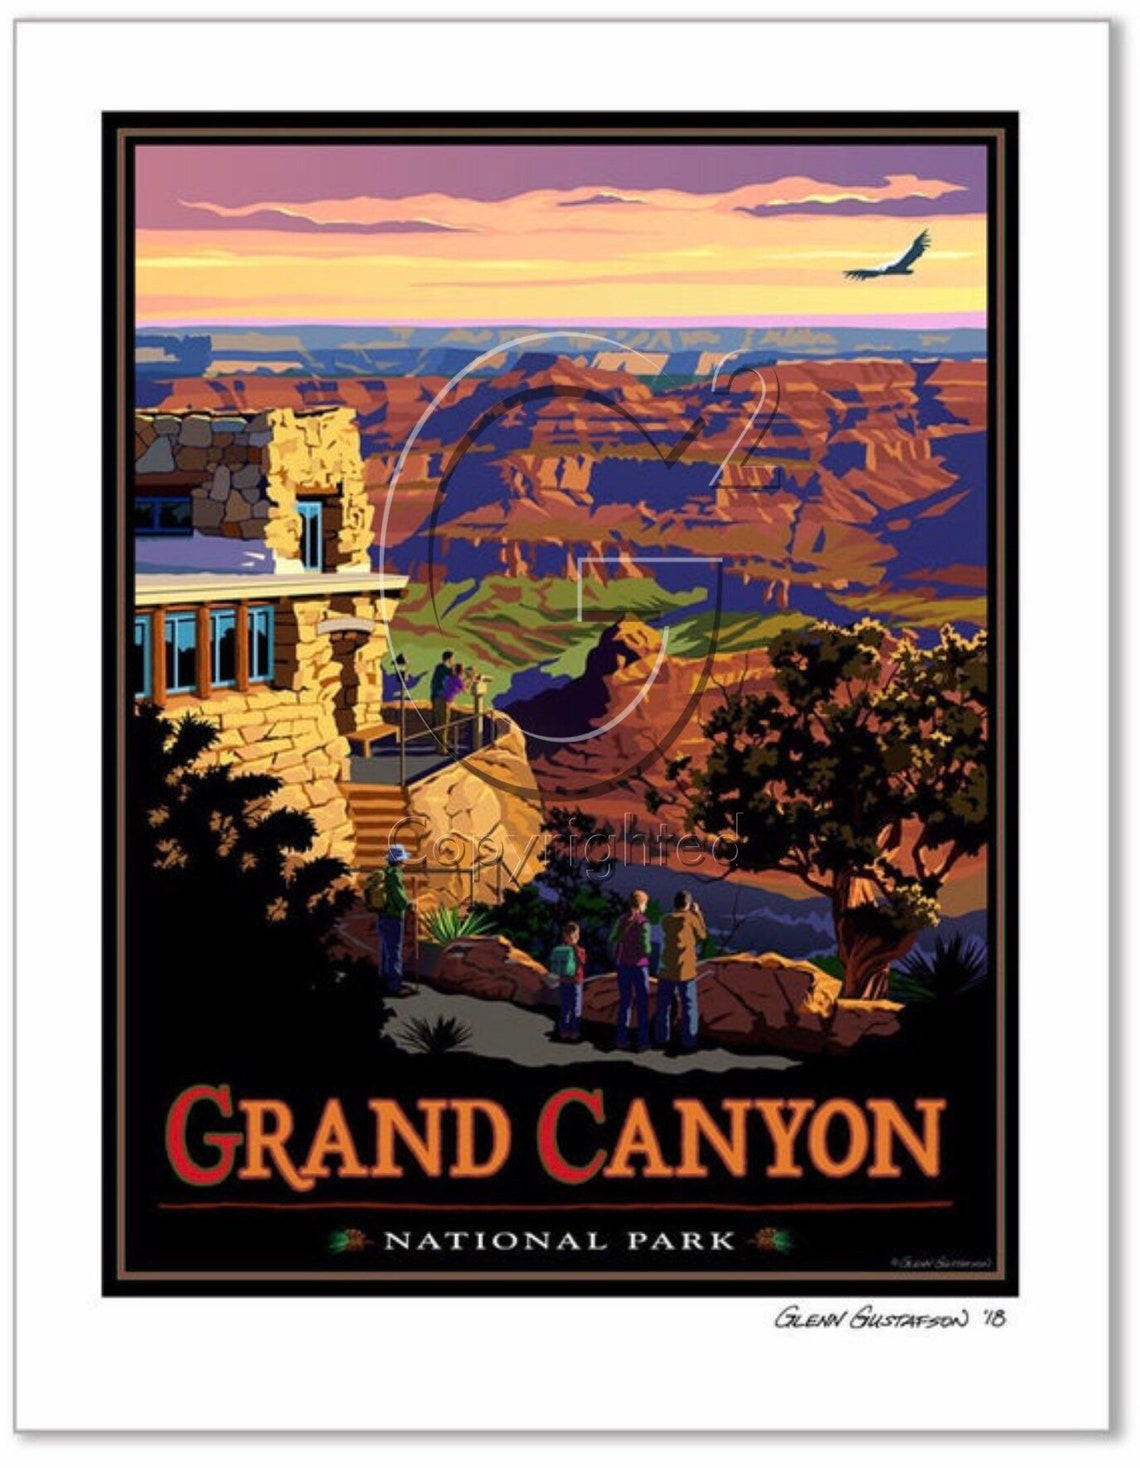 Grand Canyon National Park Lookout Studio. Free Shipping. - Etsy